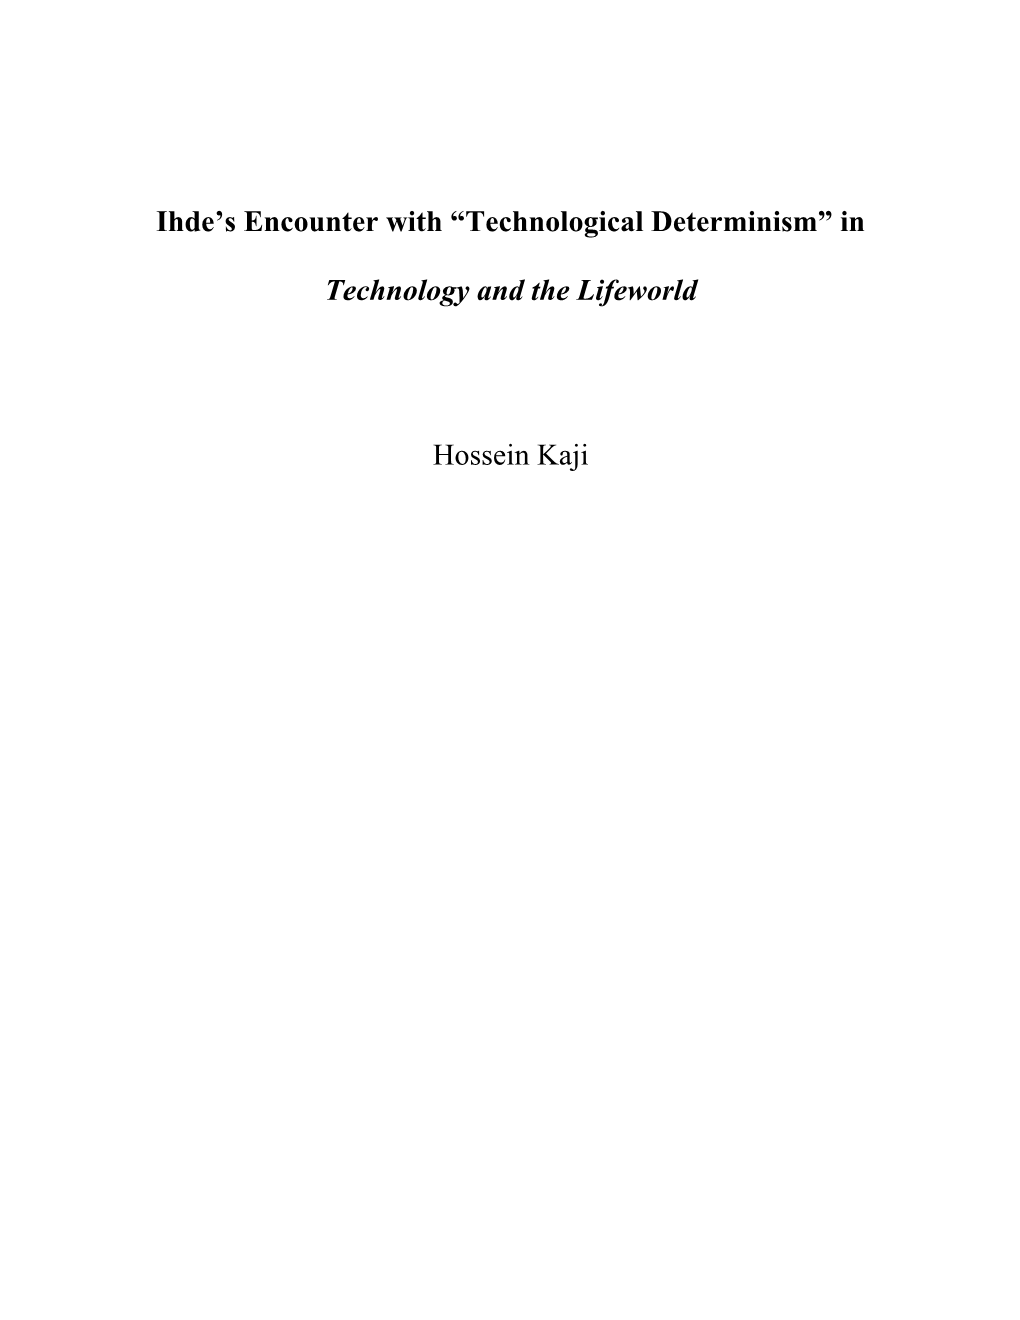 Ihde's Encounter with “Technological Determinism”